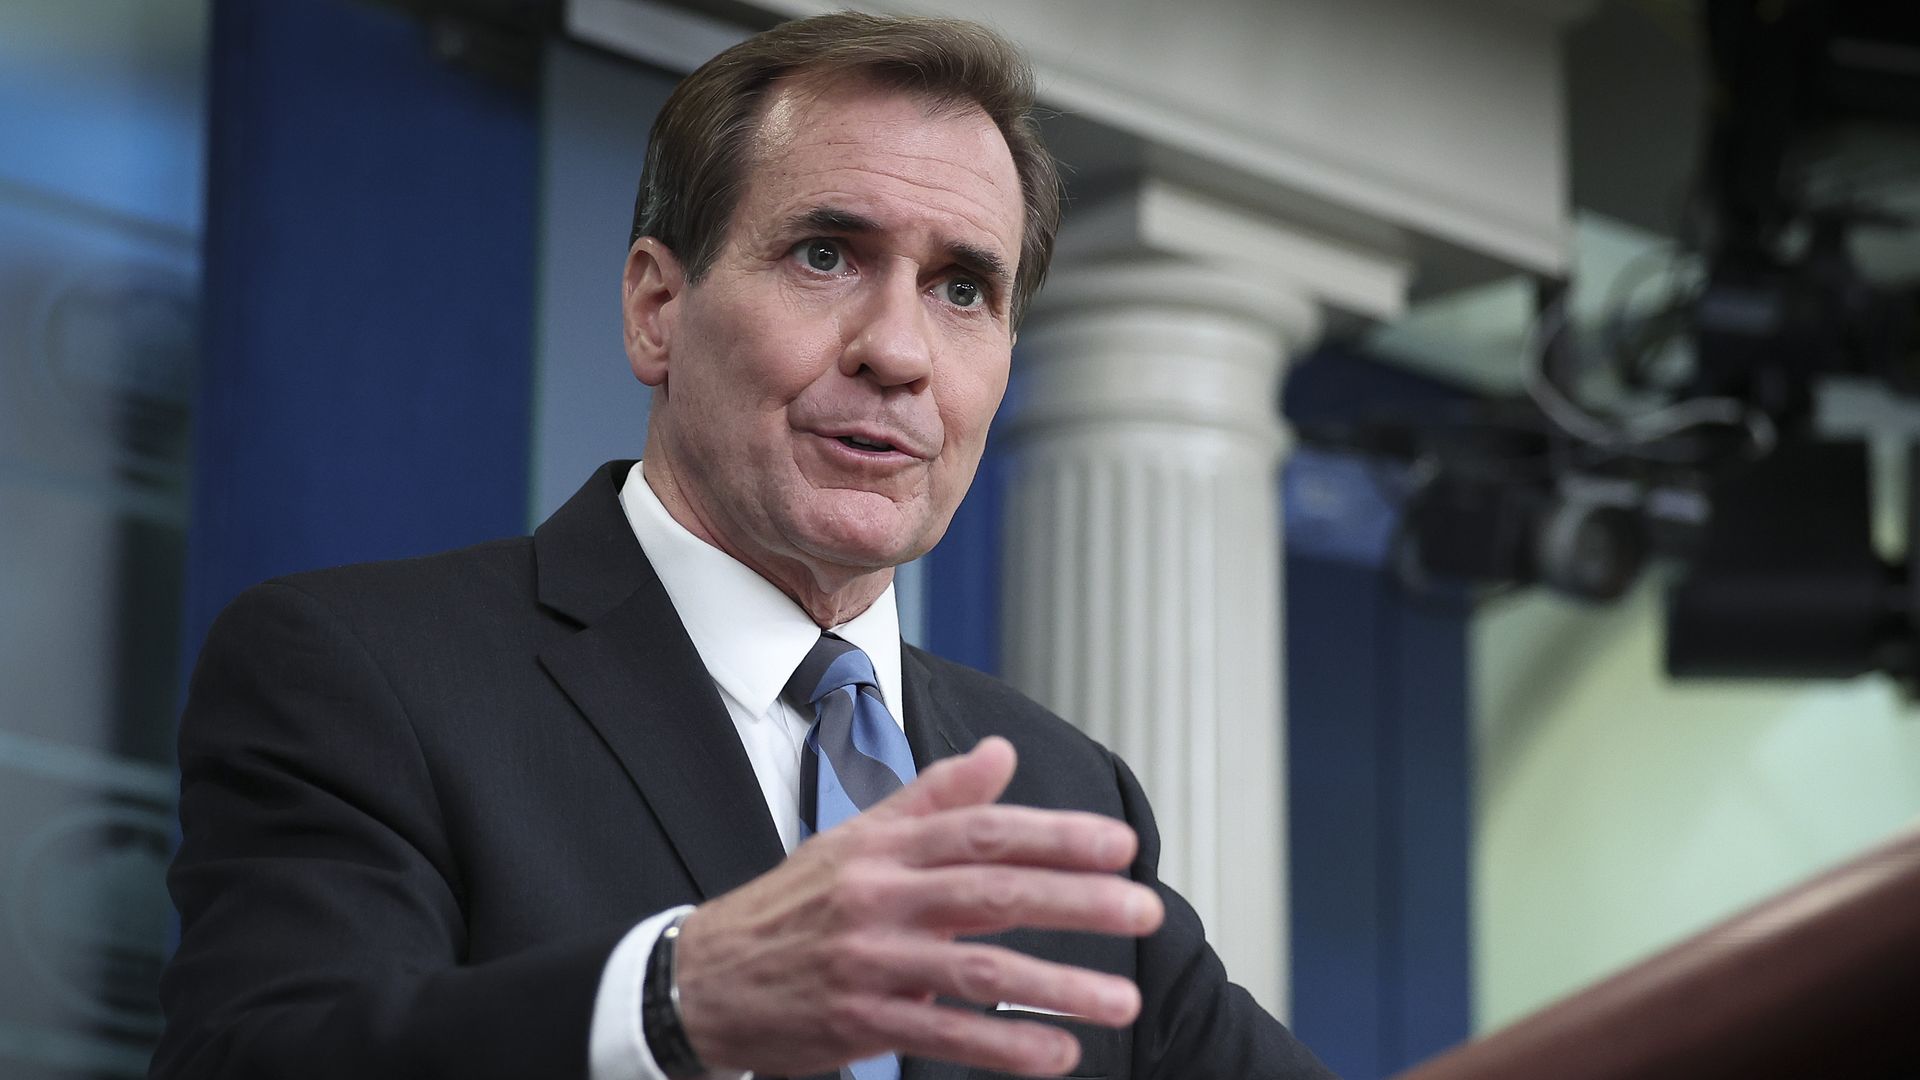 National Security Council spokesperson John Kirby speaking to reporters in the White House on Aug. 4.